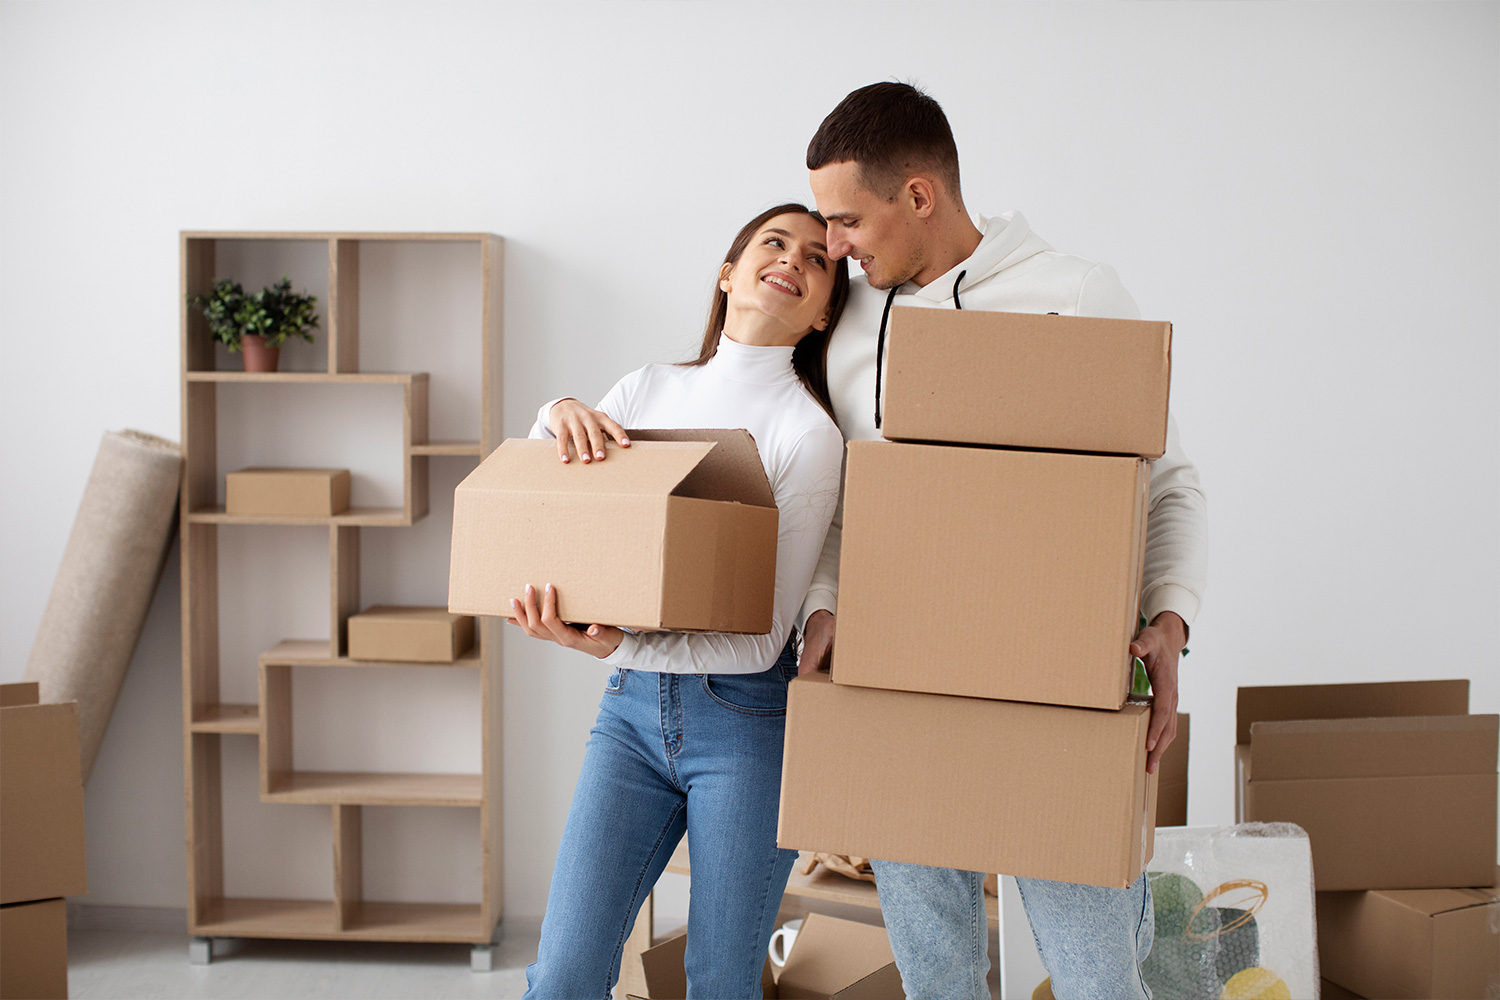 Professional Moving Services in Melbourne